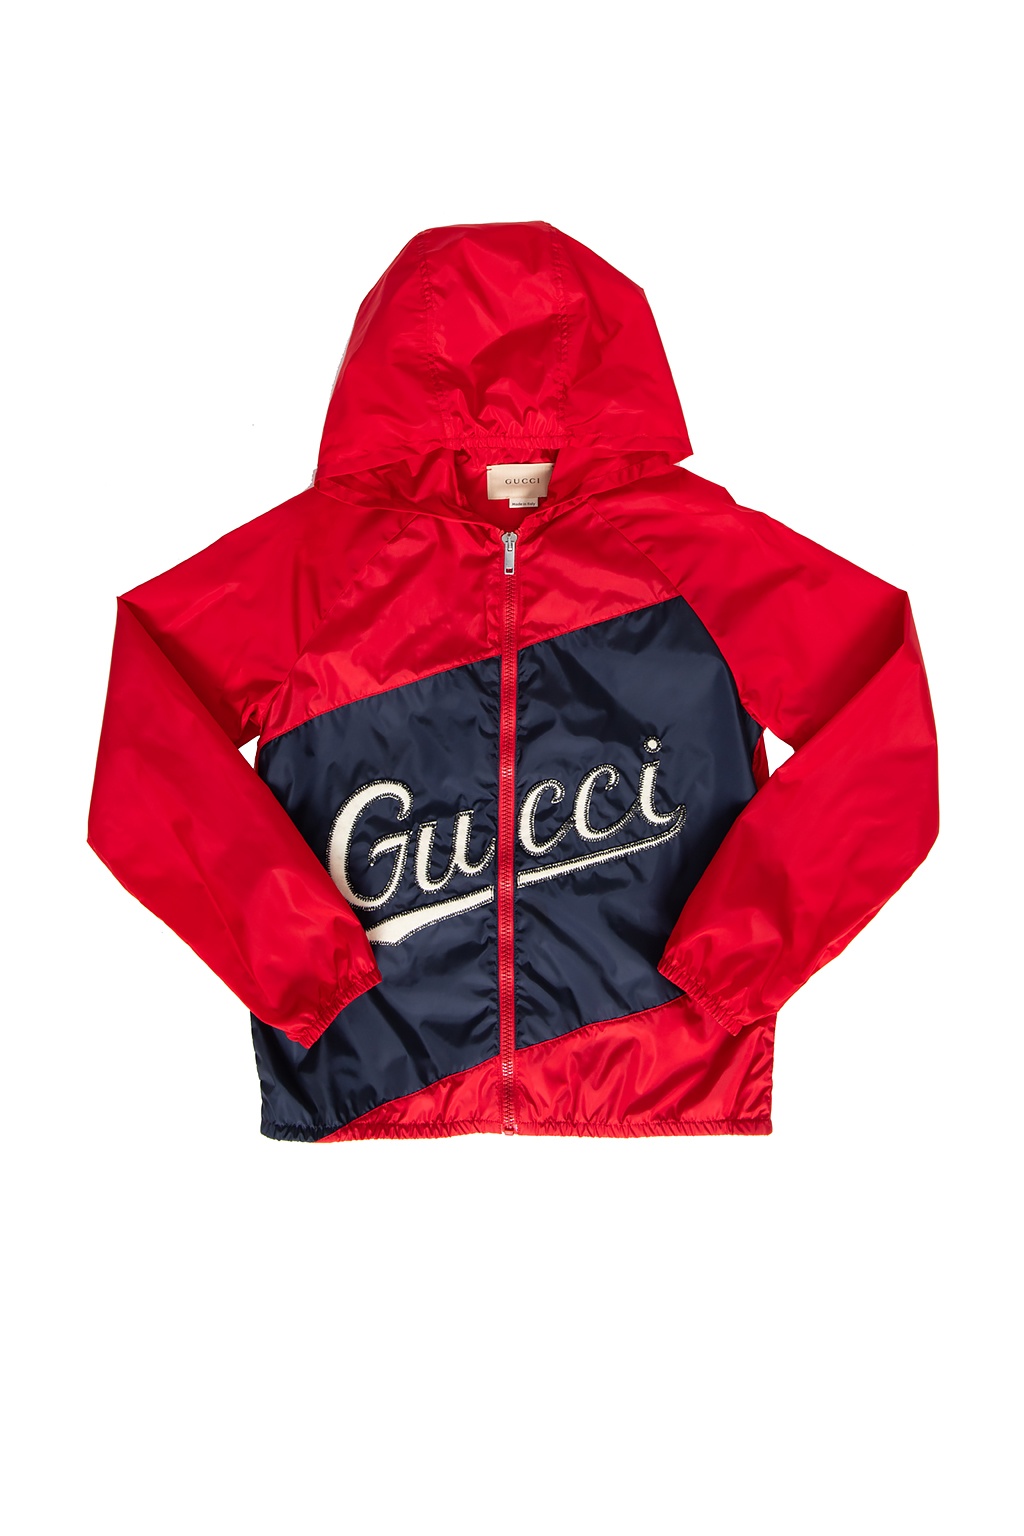 CLOTHES 4-14 YEARS Gucci Kids - IicfShops US